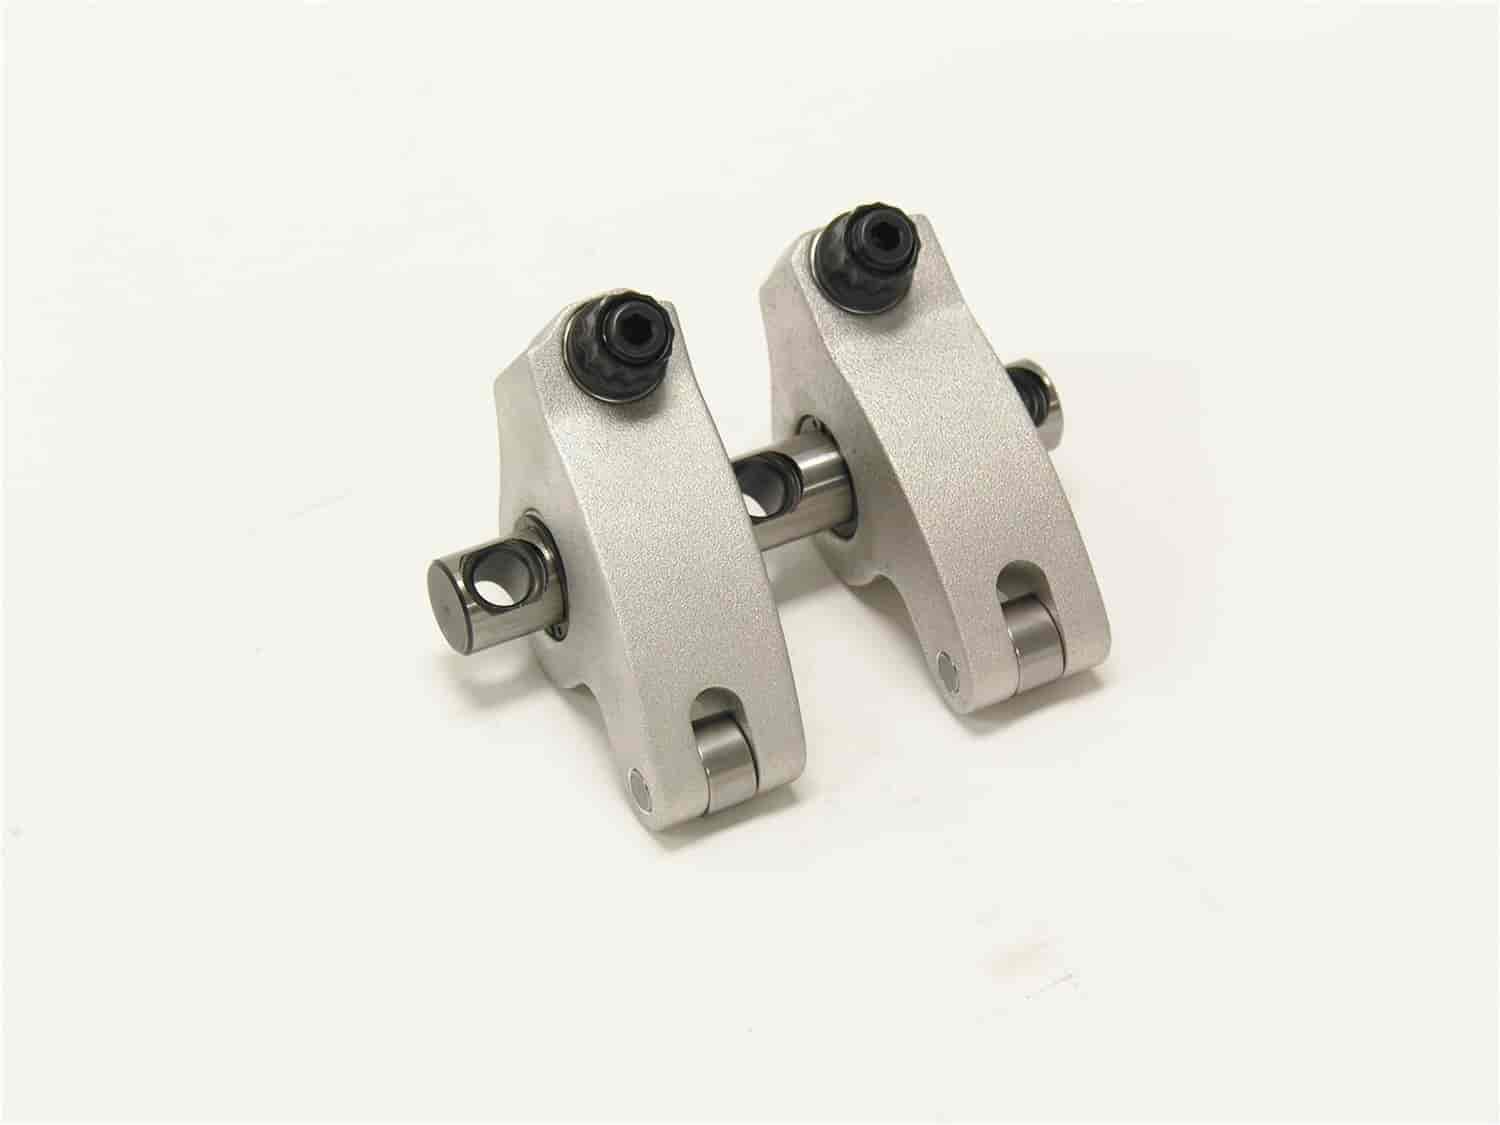 Series SS Shaft Mount Rockers Fits: World Products Motown Rocker Ratio: 1.6 IN / 1.5 EX